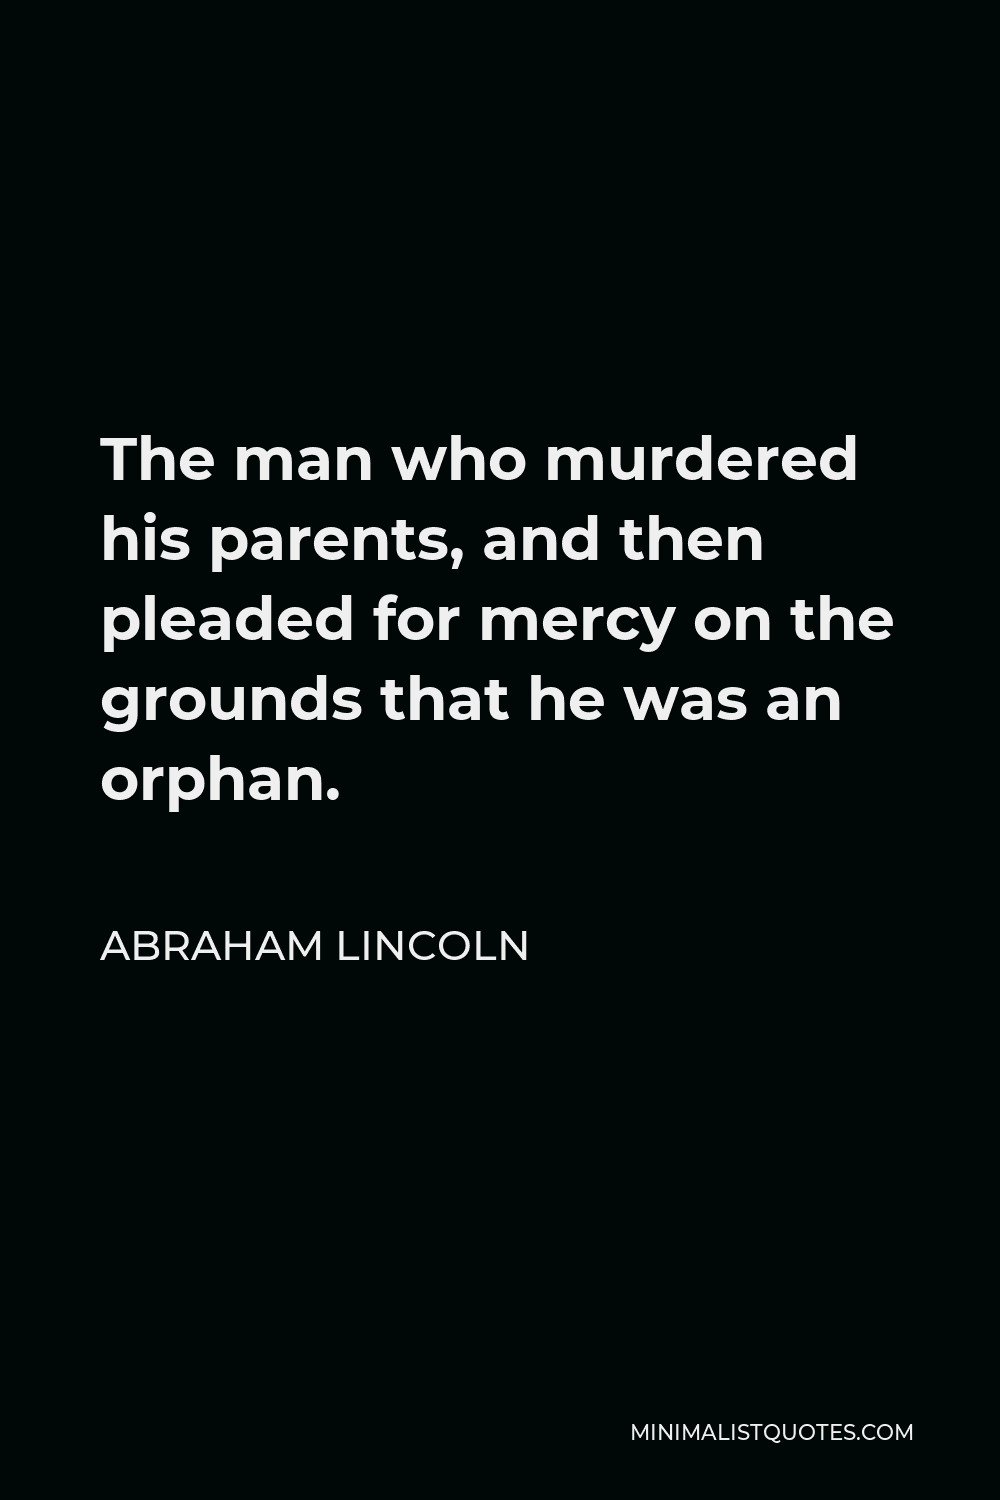 Abraham Lincoln Quote - The man who murdered his parents, and then pleaded for mercy on the grounds that he was an orphan.